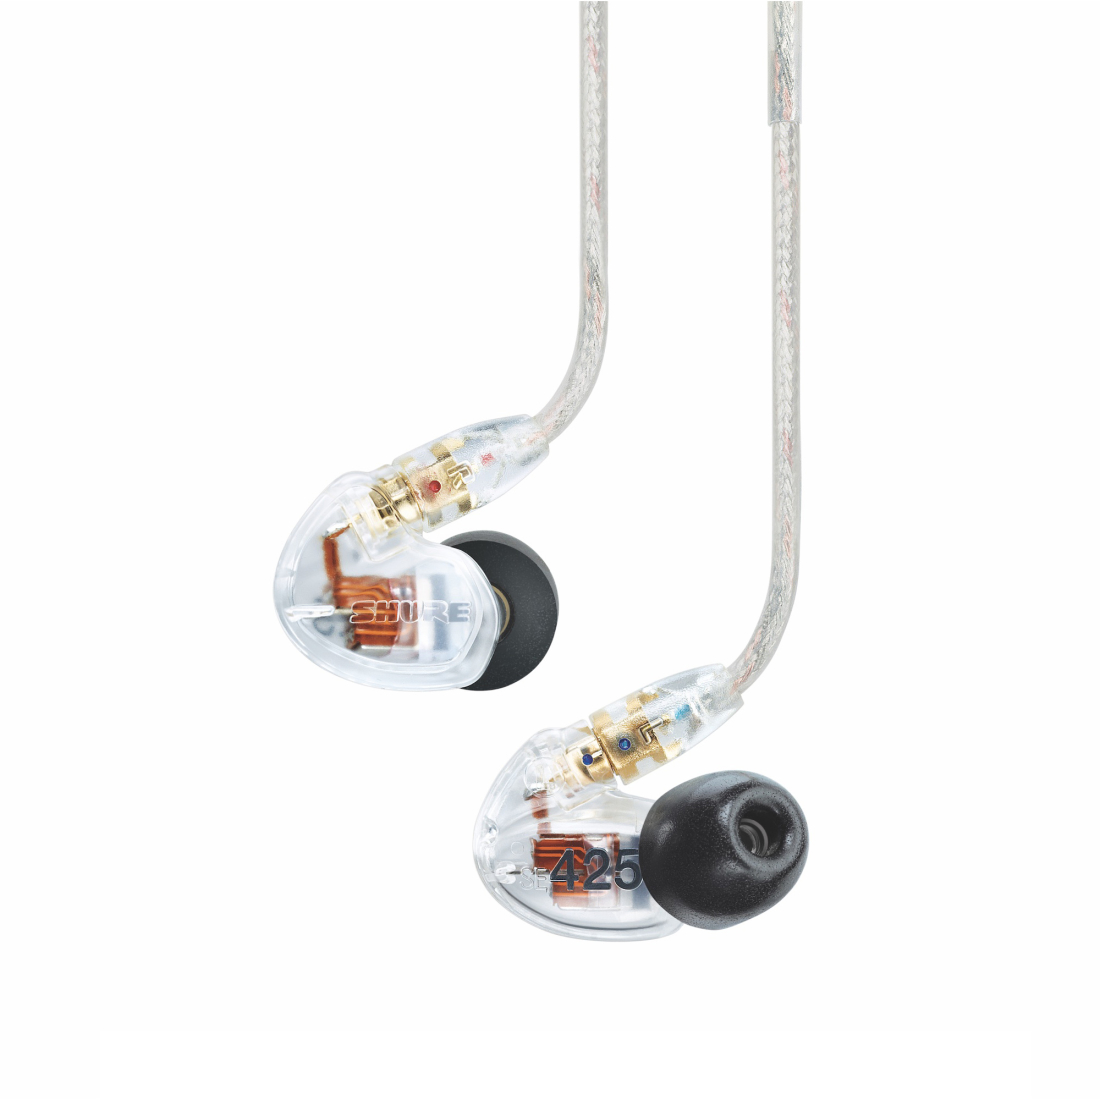 SE425 Sound Isolating Earphone - Clear